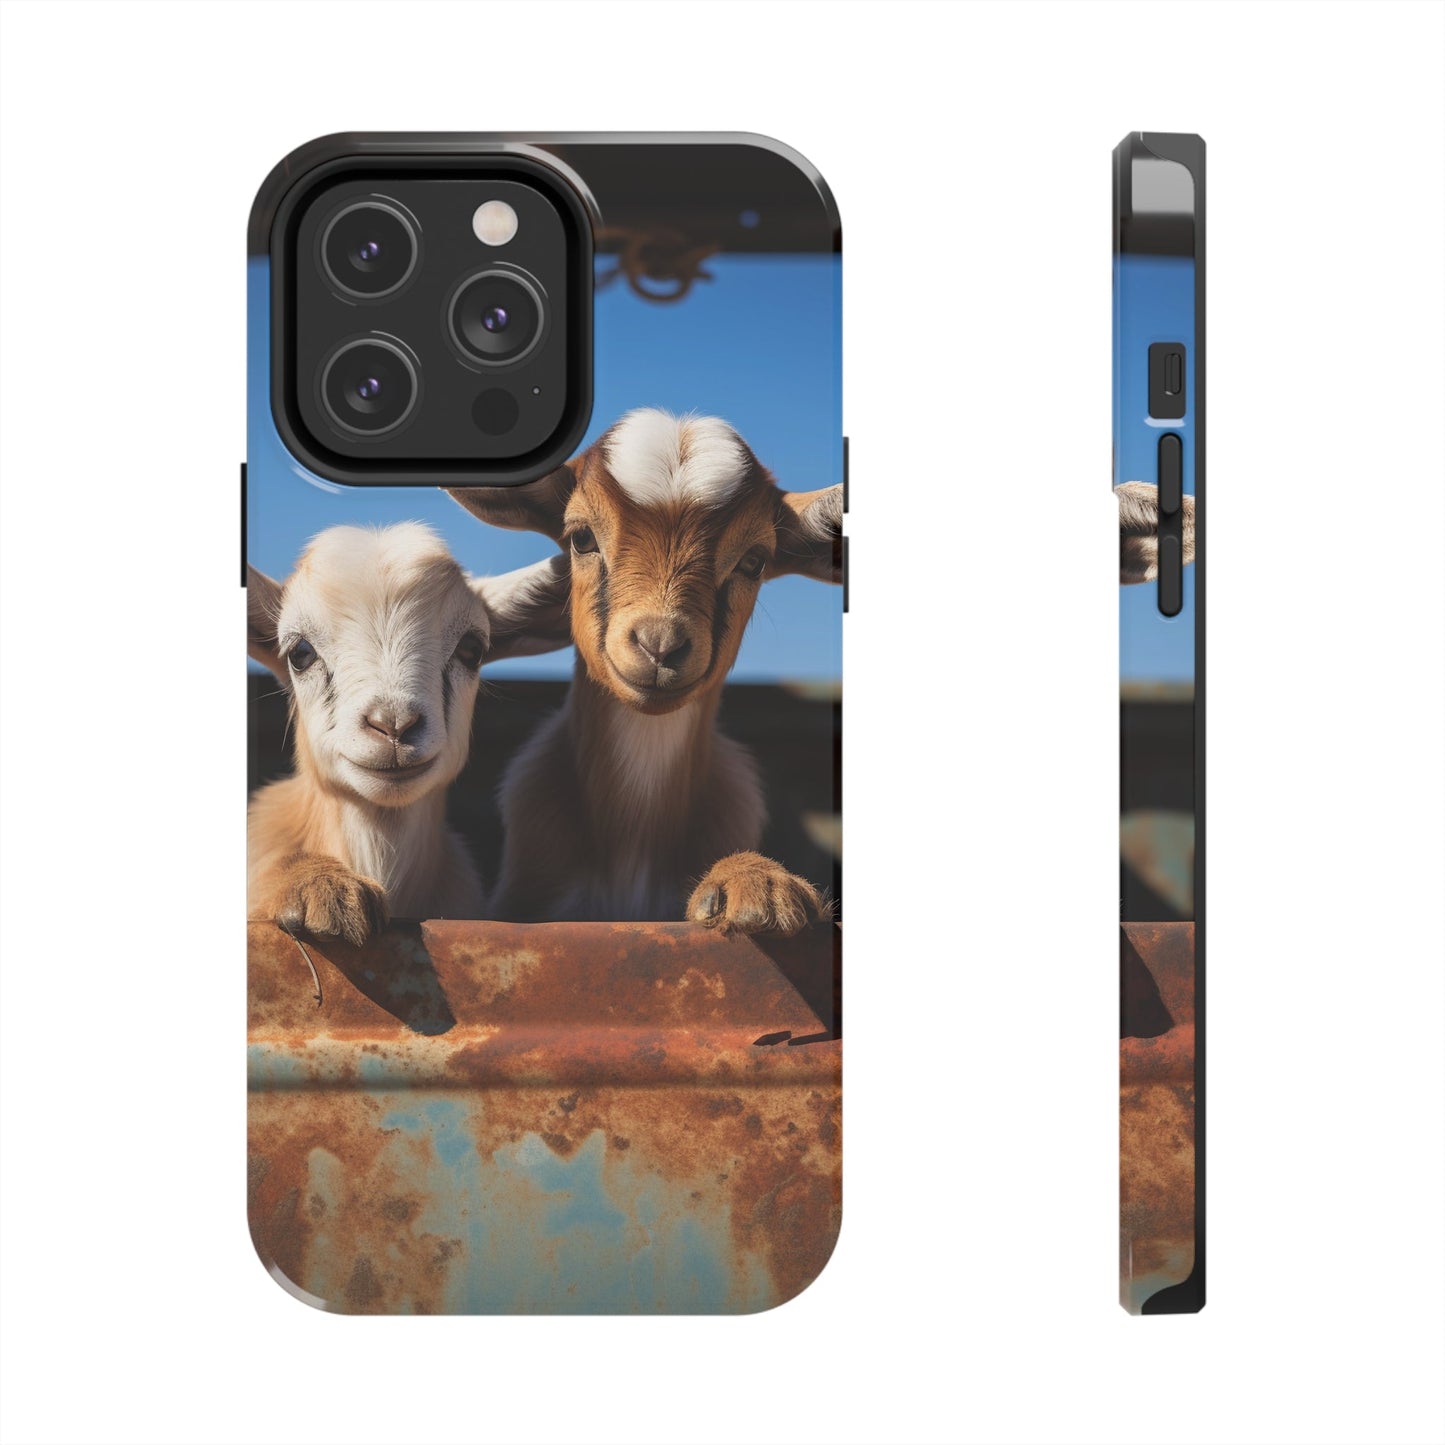 Cute Goat iPhone Case, Baby Farm Animals, Homesteading, Farmstead, Husbandry, Gift For Her or Him, Farm Print, Country Chic Decor, Rustic - BOGO Cases